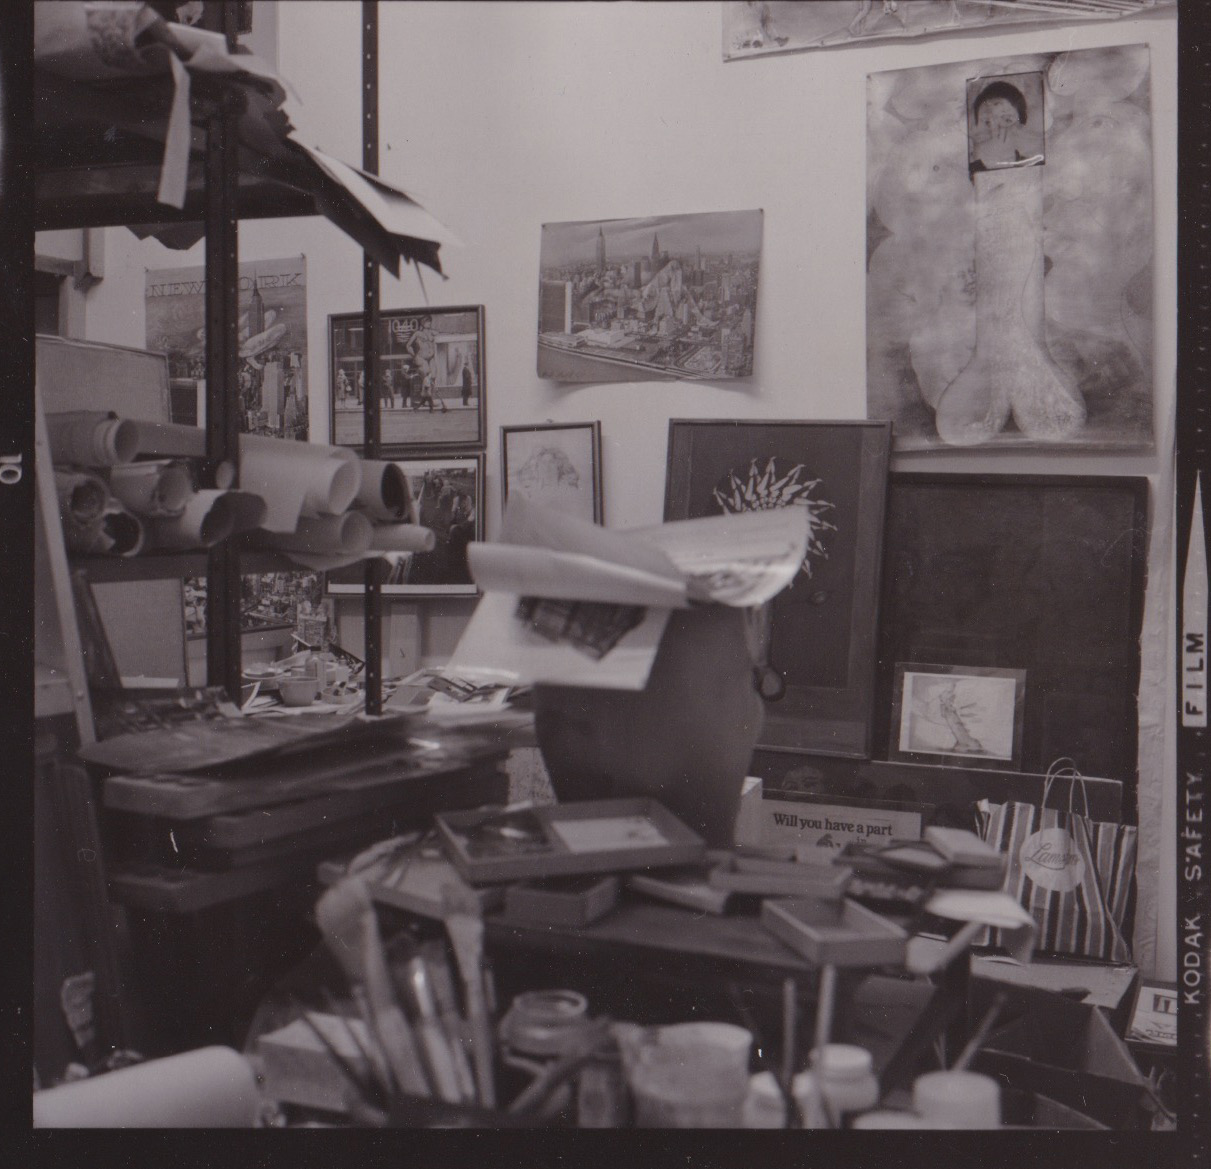 Black-and-white photograph of a cluttered artist's studio. Hanging on the wall to the right is a large painting of a phallus.